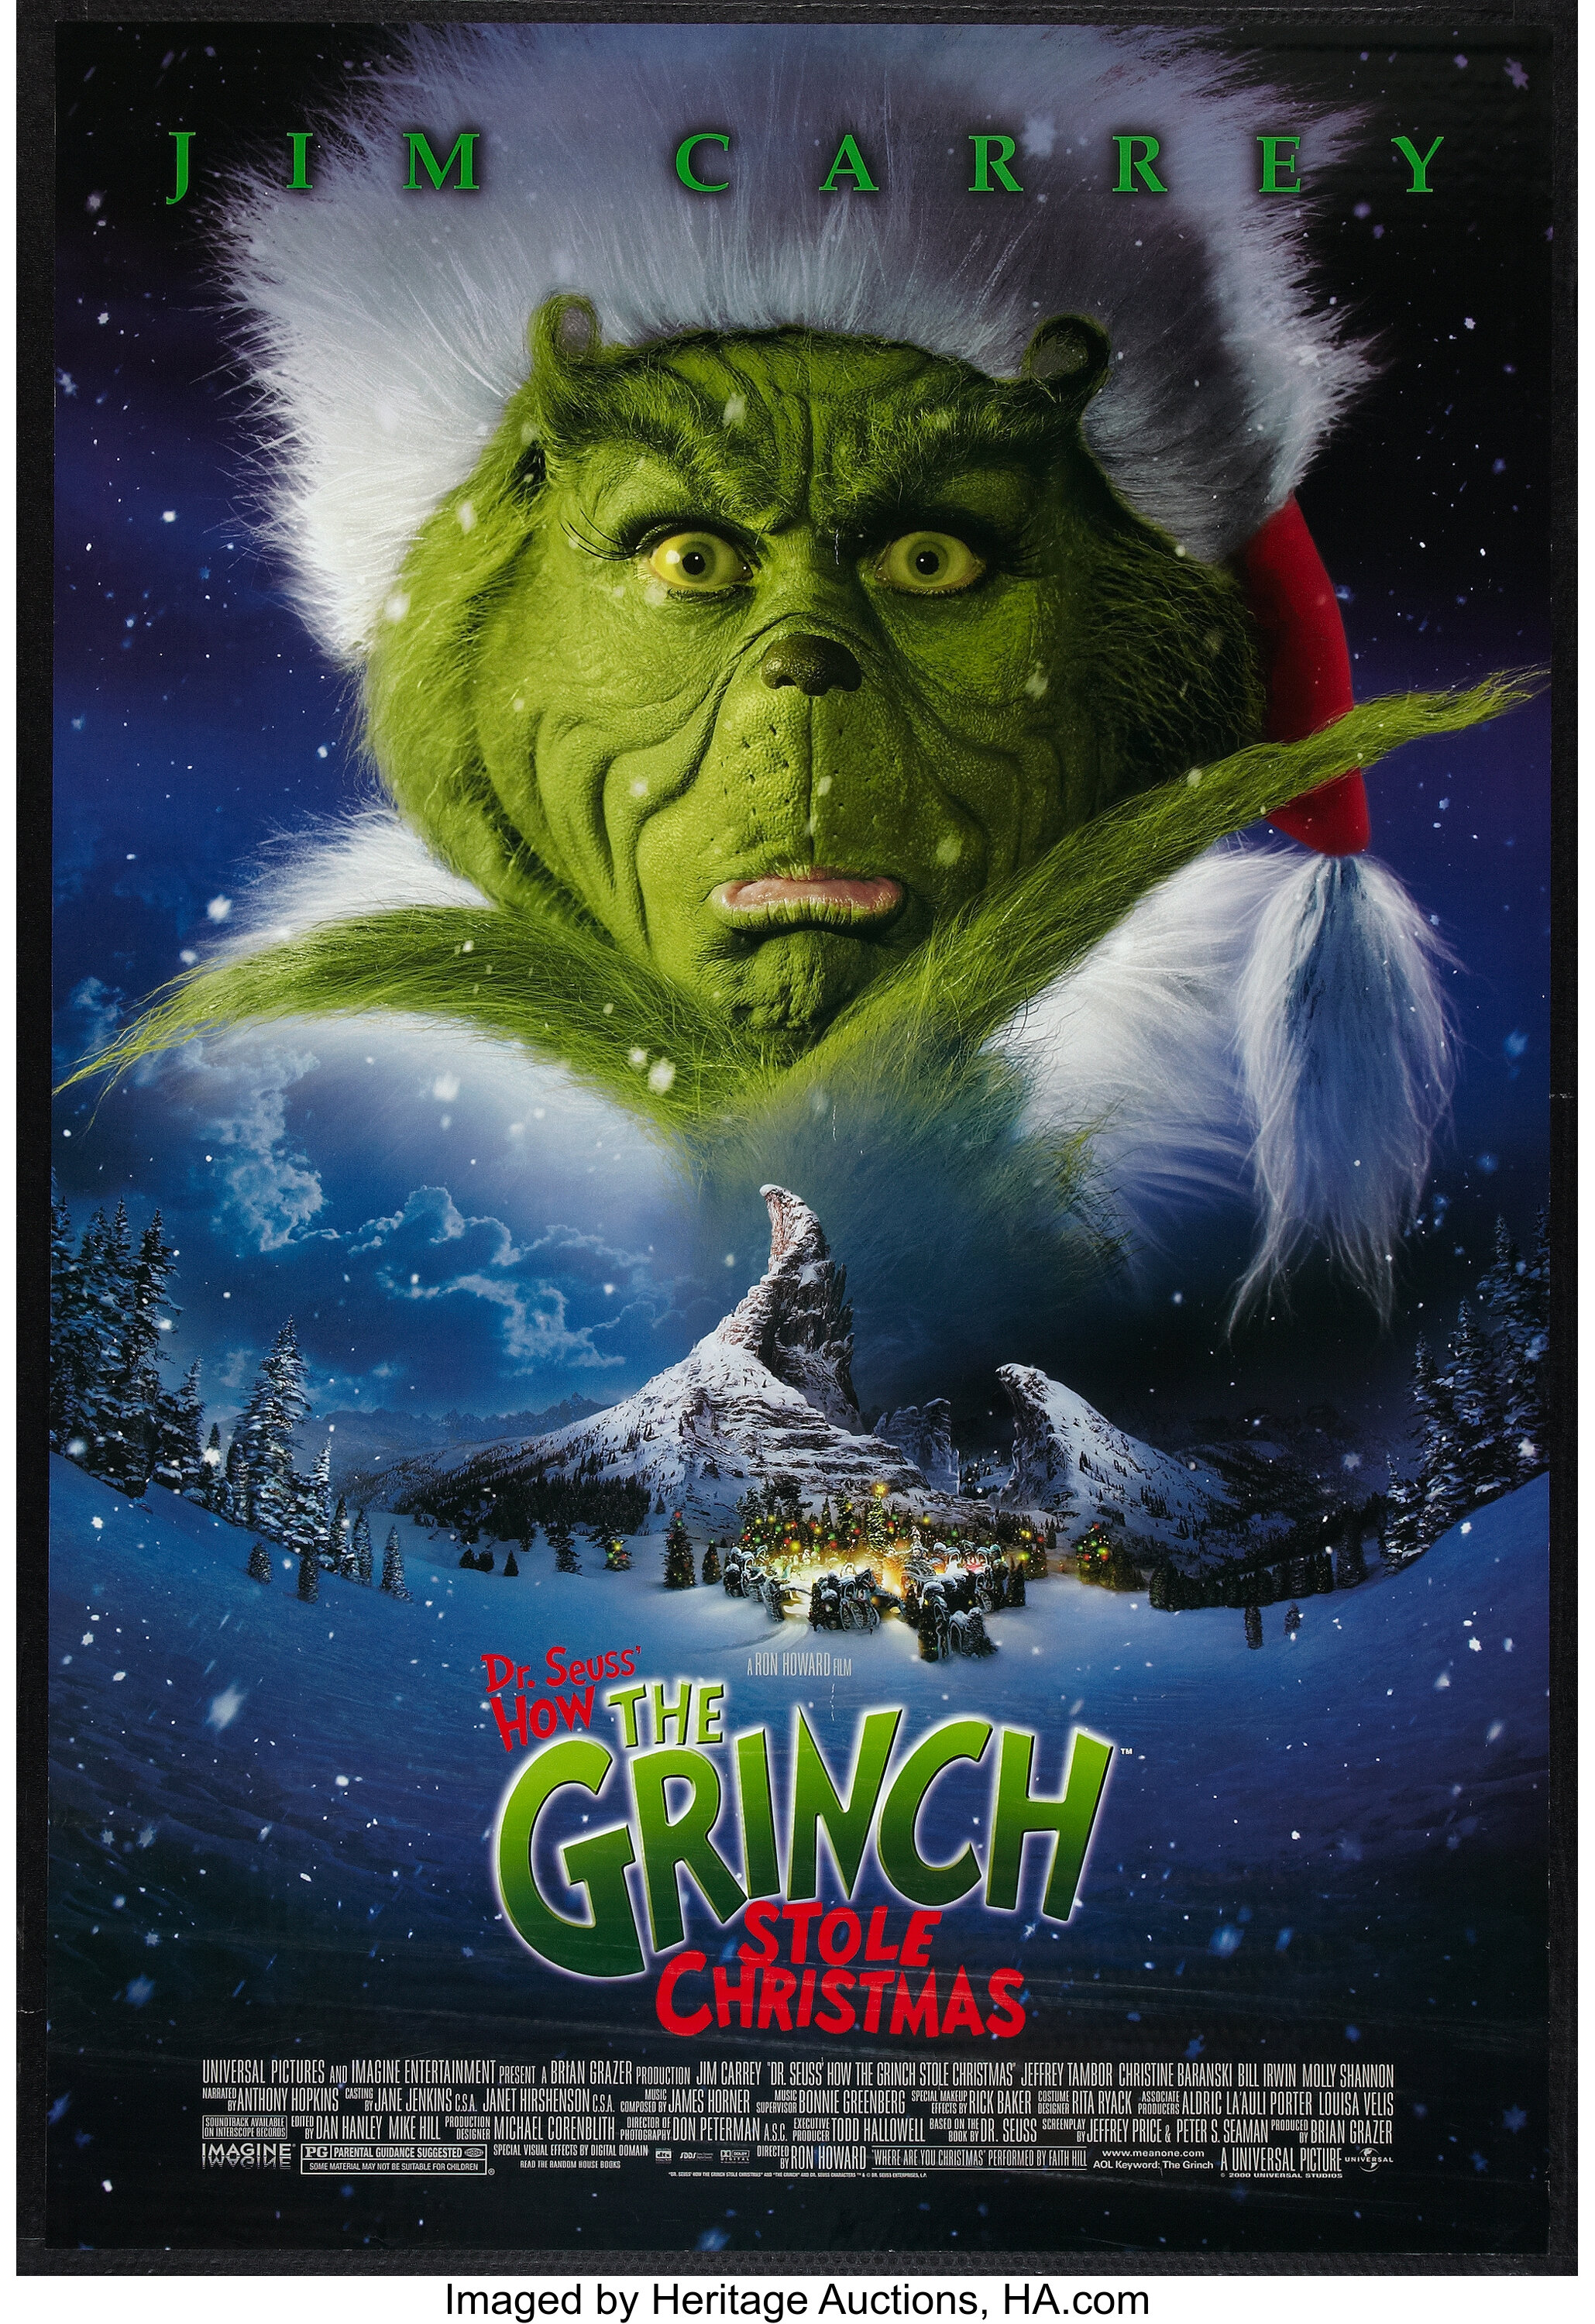 How the grinch stole christmas movie online for free 2000 How The Grinch Stole Christmas Lot Universal 2000 One Sheets Lot 52189 Heritage Auctions